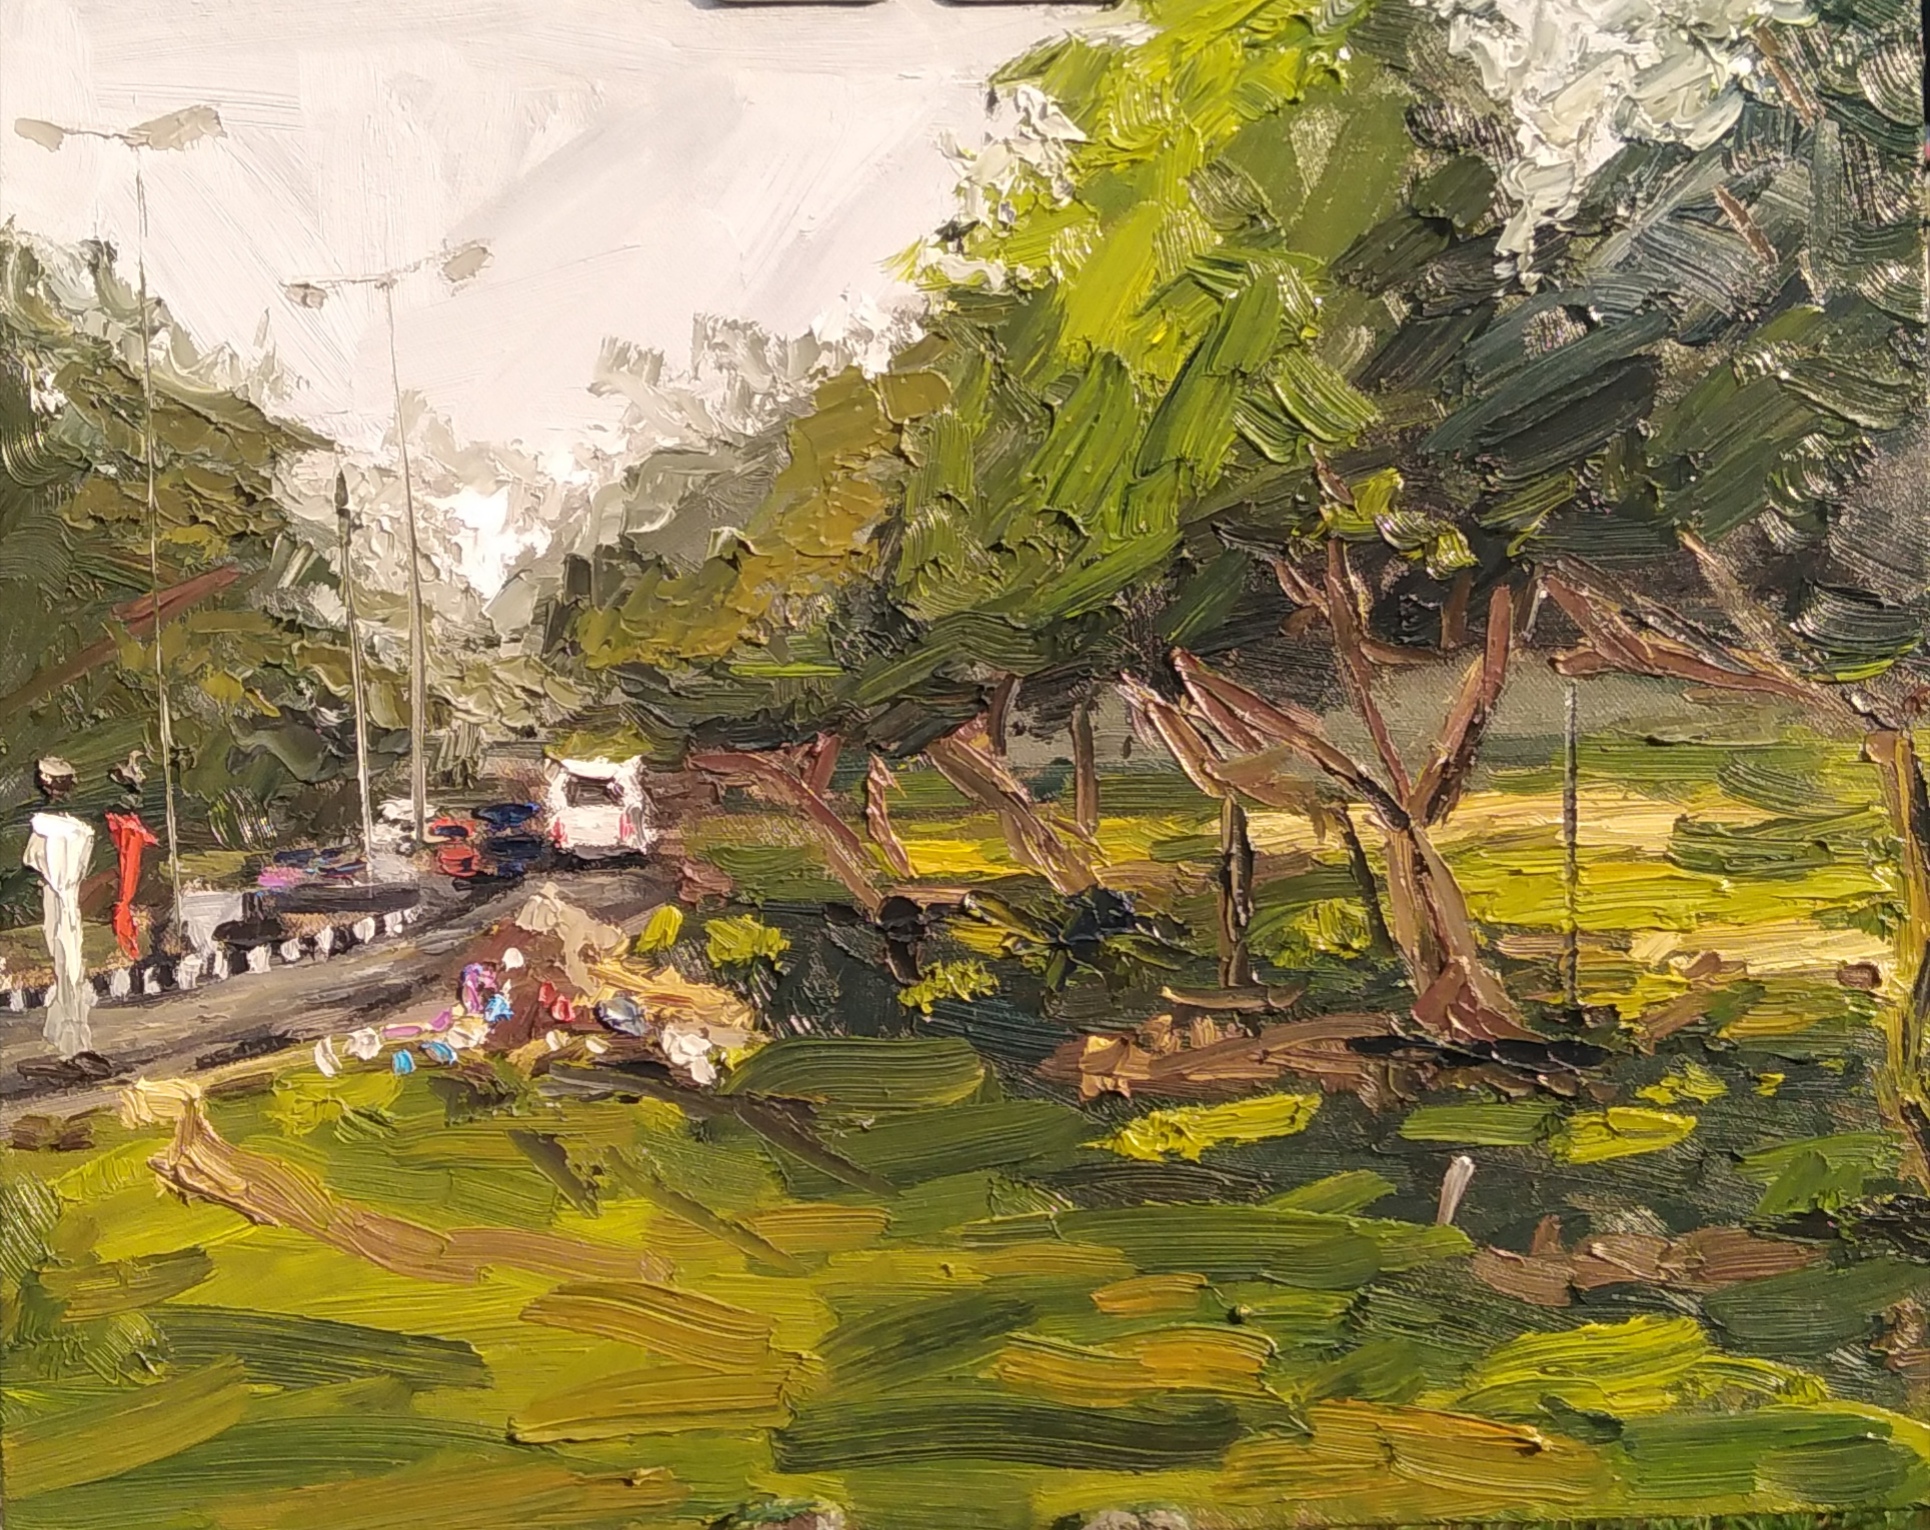 Edak Young, "Airport Field," oil on canvas, 13 x 16 in. 